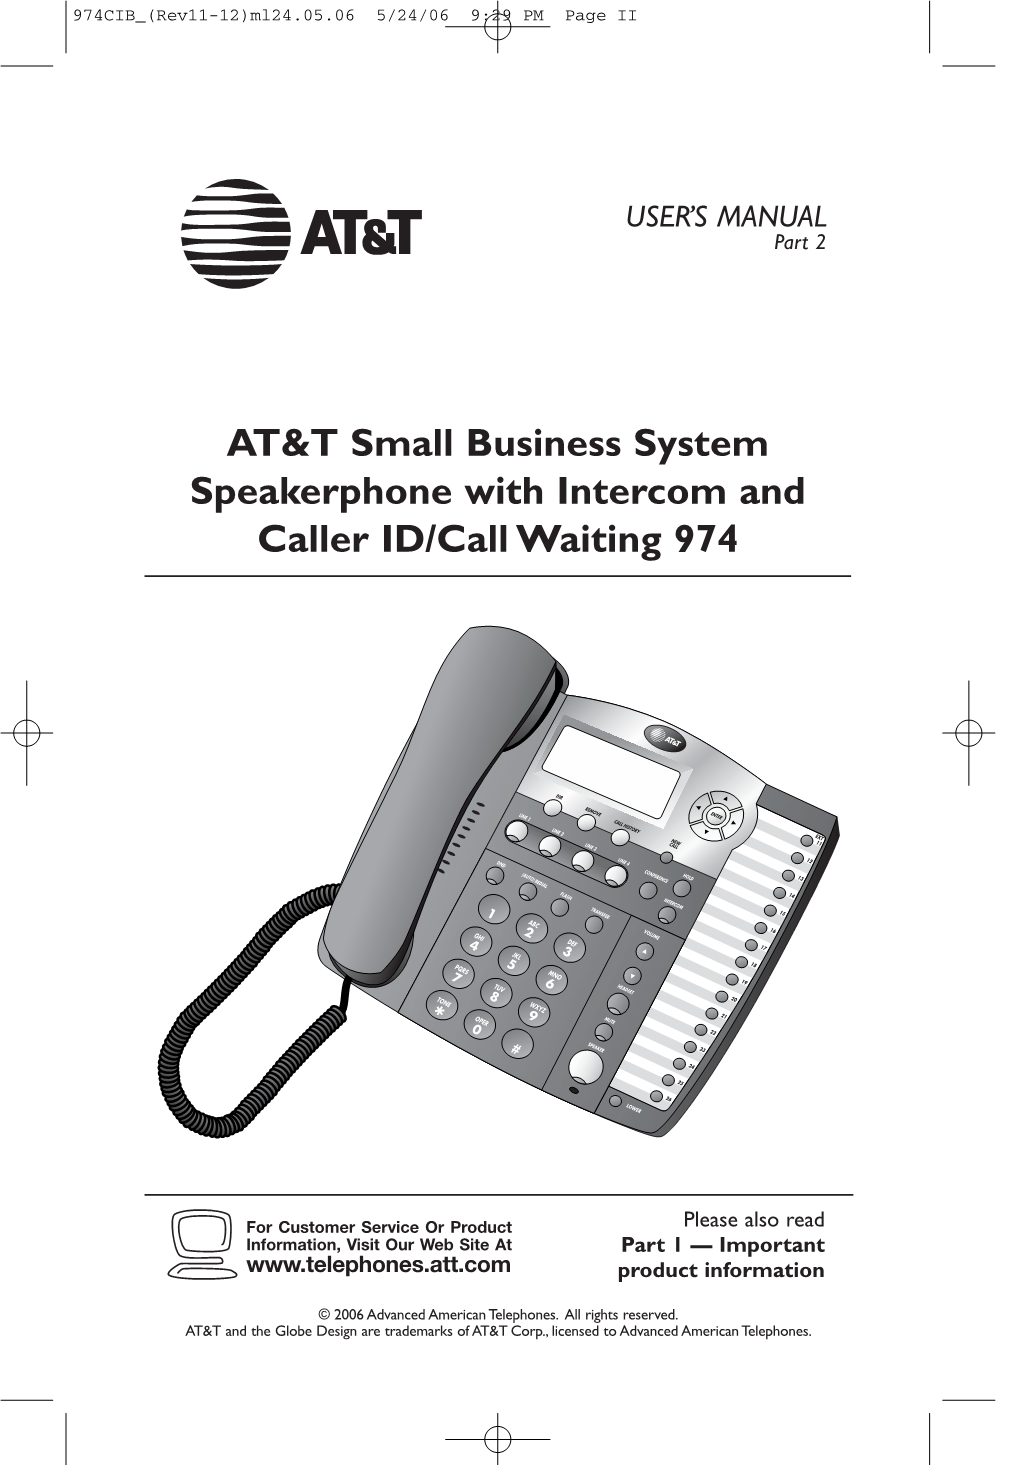 AT&T Small Business System Speakerphone with Intercom And